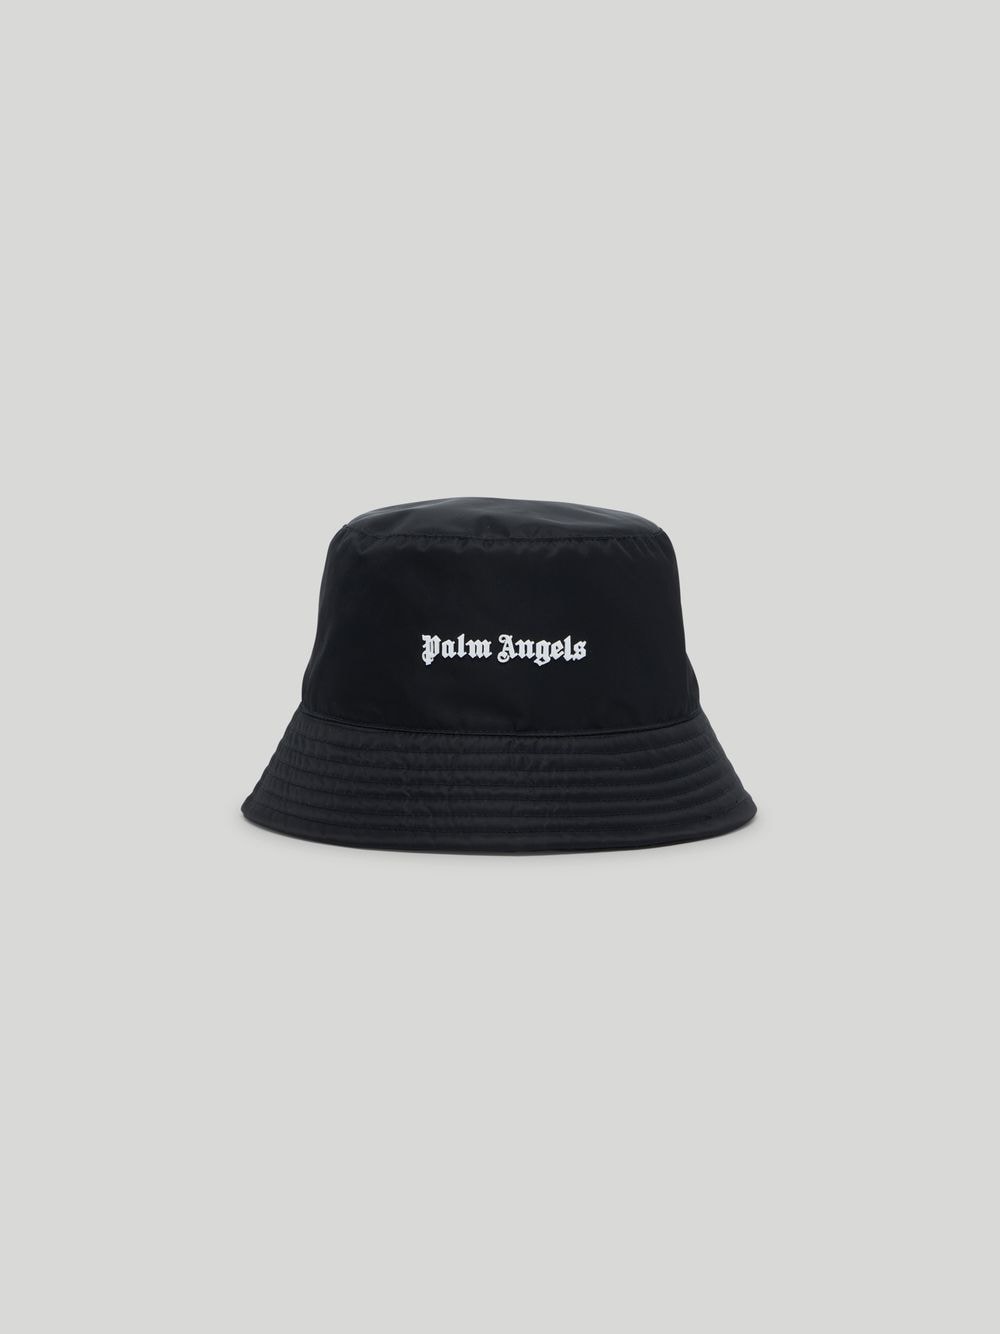 CLASSIC LOGO BUCKET HAT in black - Palm Angels® Official